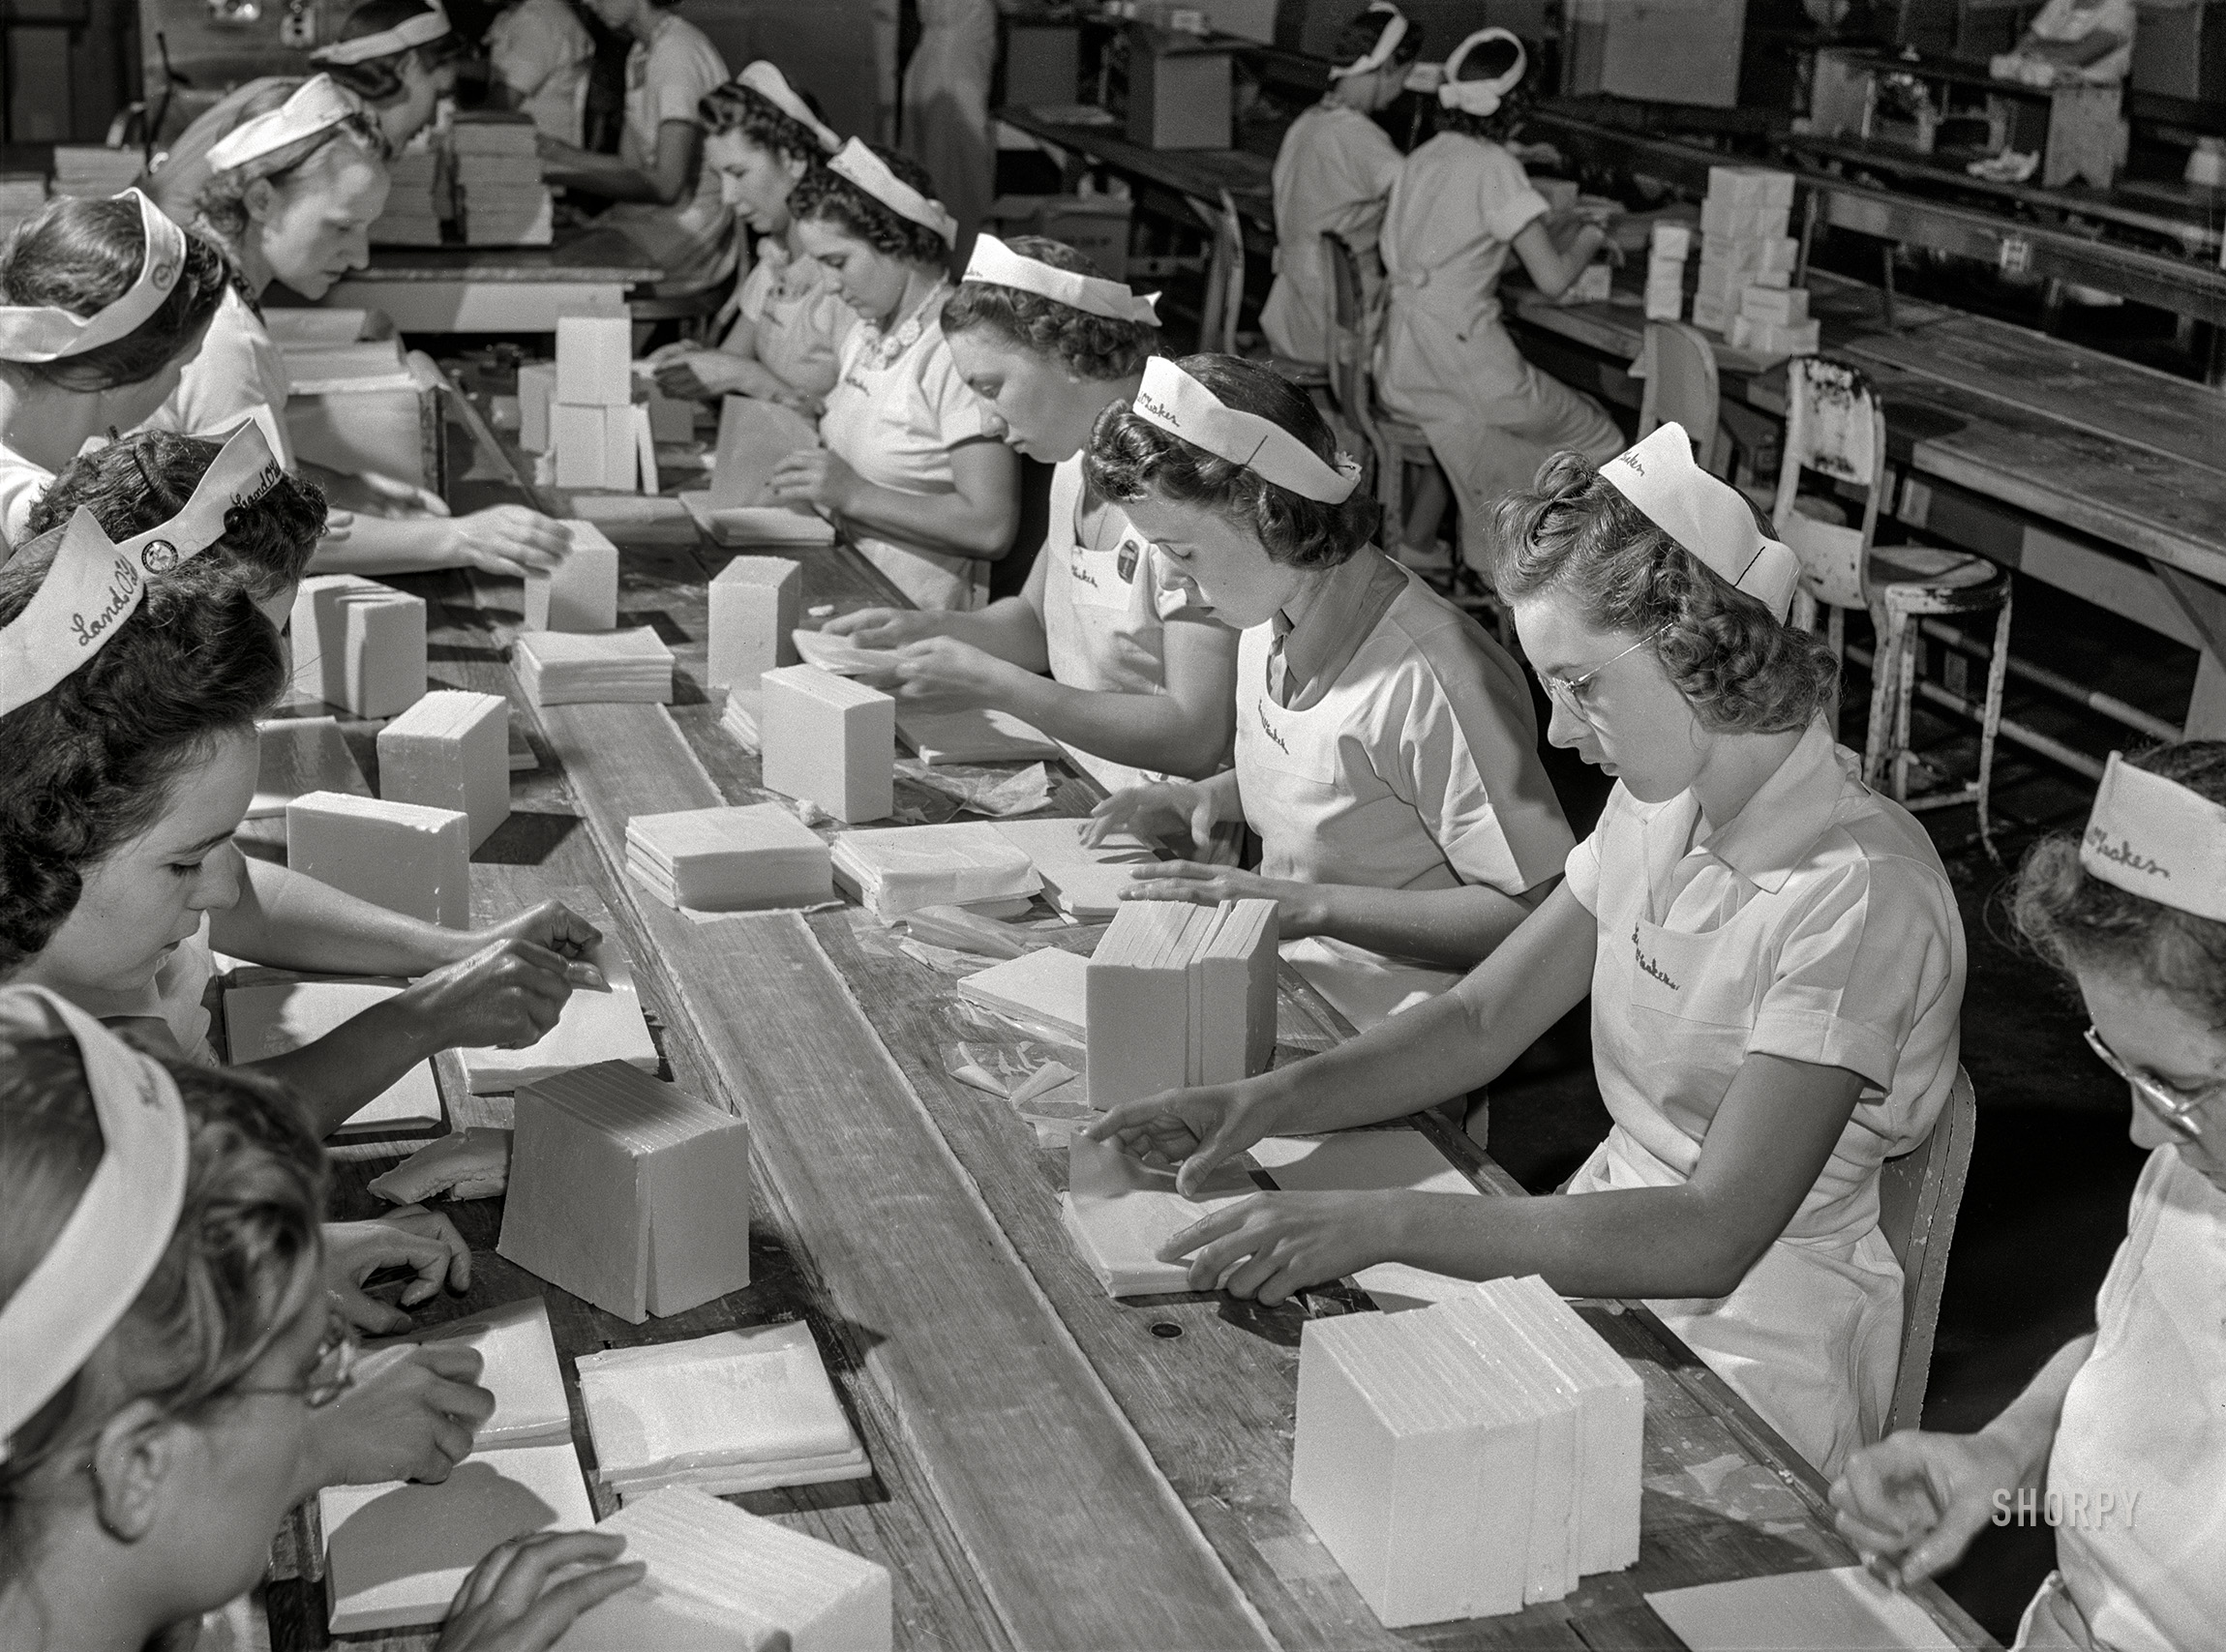 July 1941. "Packing butter cut into squares for use in restaurants. Land O'Lakes plant, Minneapolis, Minnesota." Acetate negative by John Vachon. View full size.